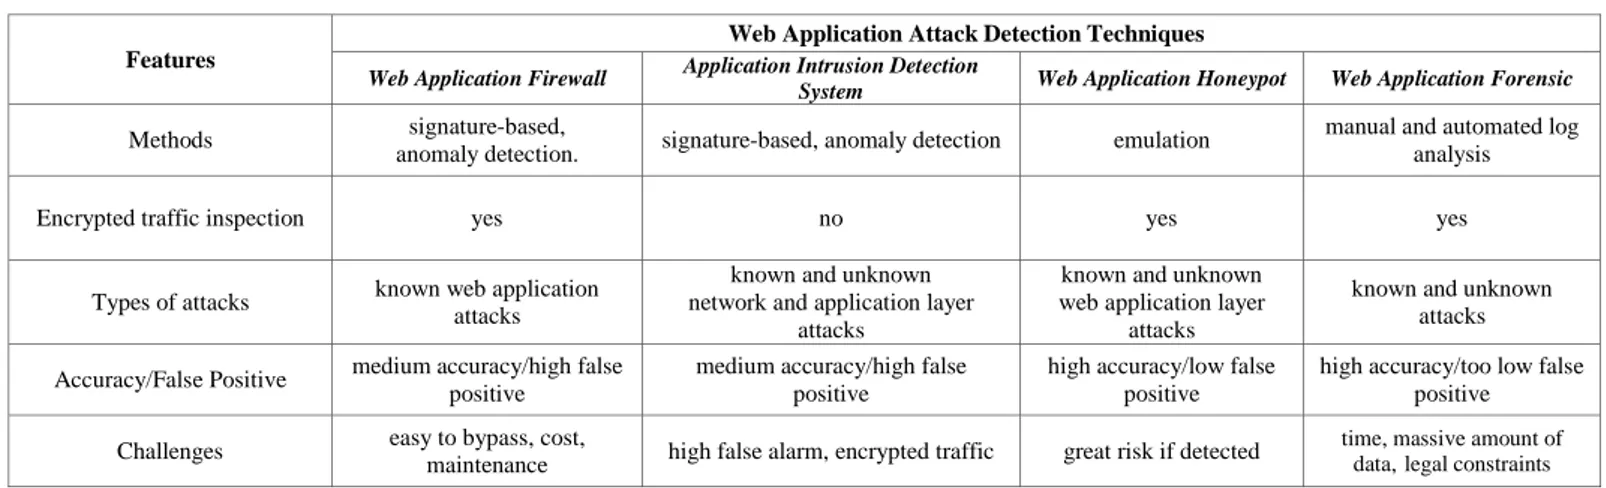 TABLE I.   COMPARISON OF THE WEB APPLICATION ATTACK DETECTION TECHNIQUE FEATURES